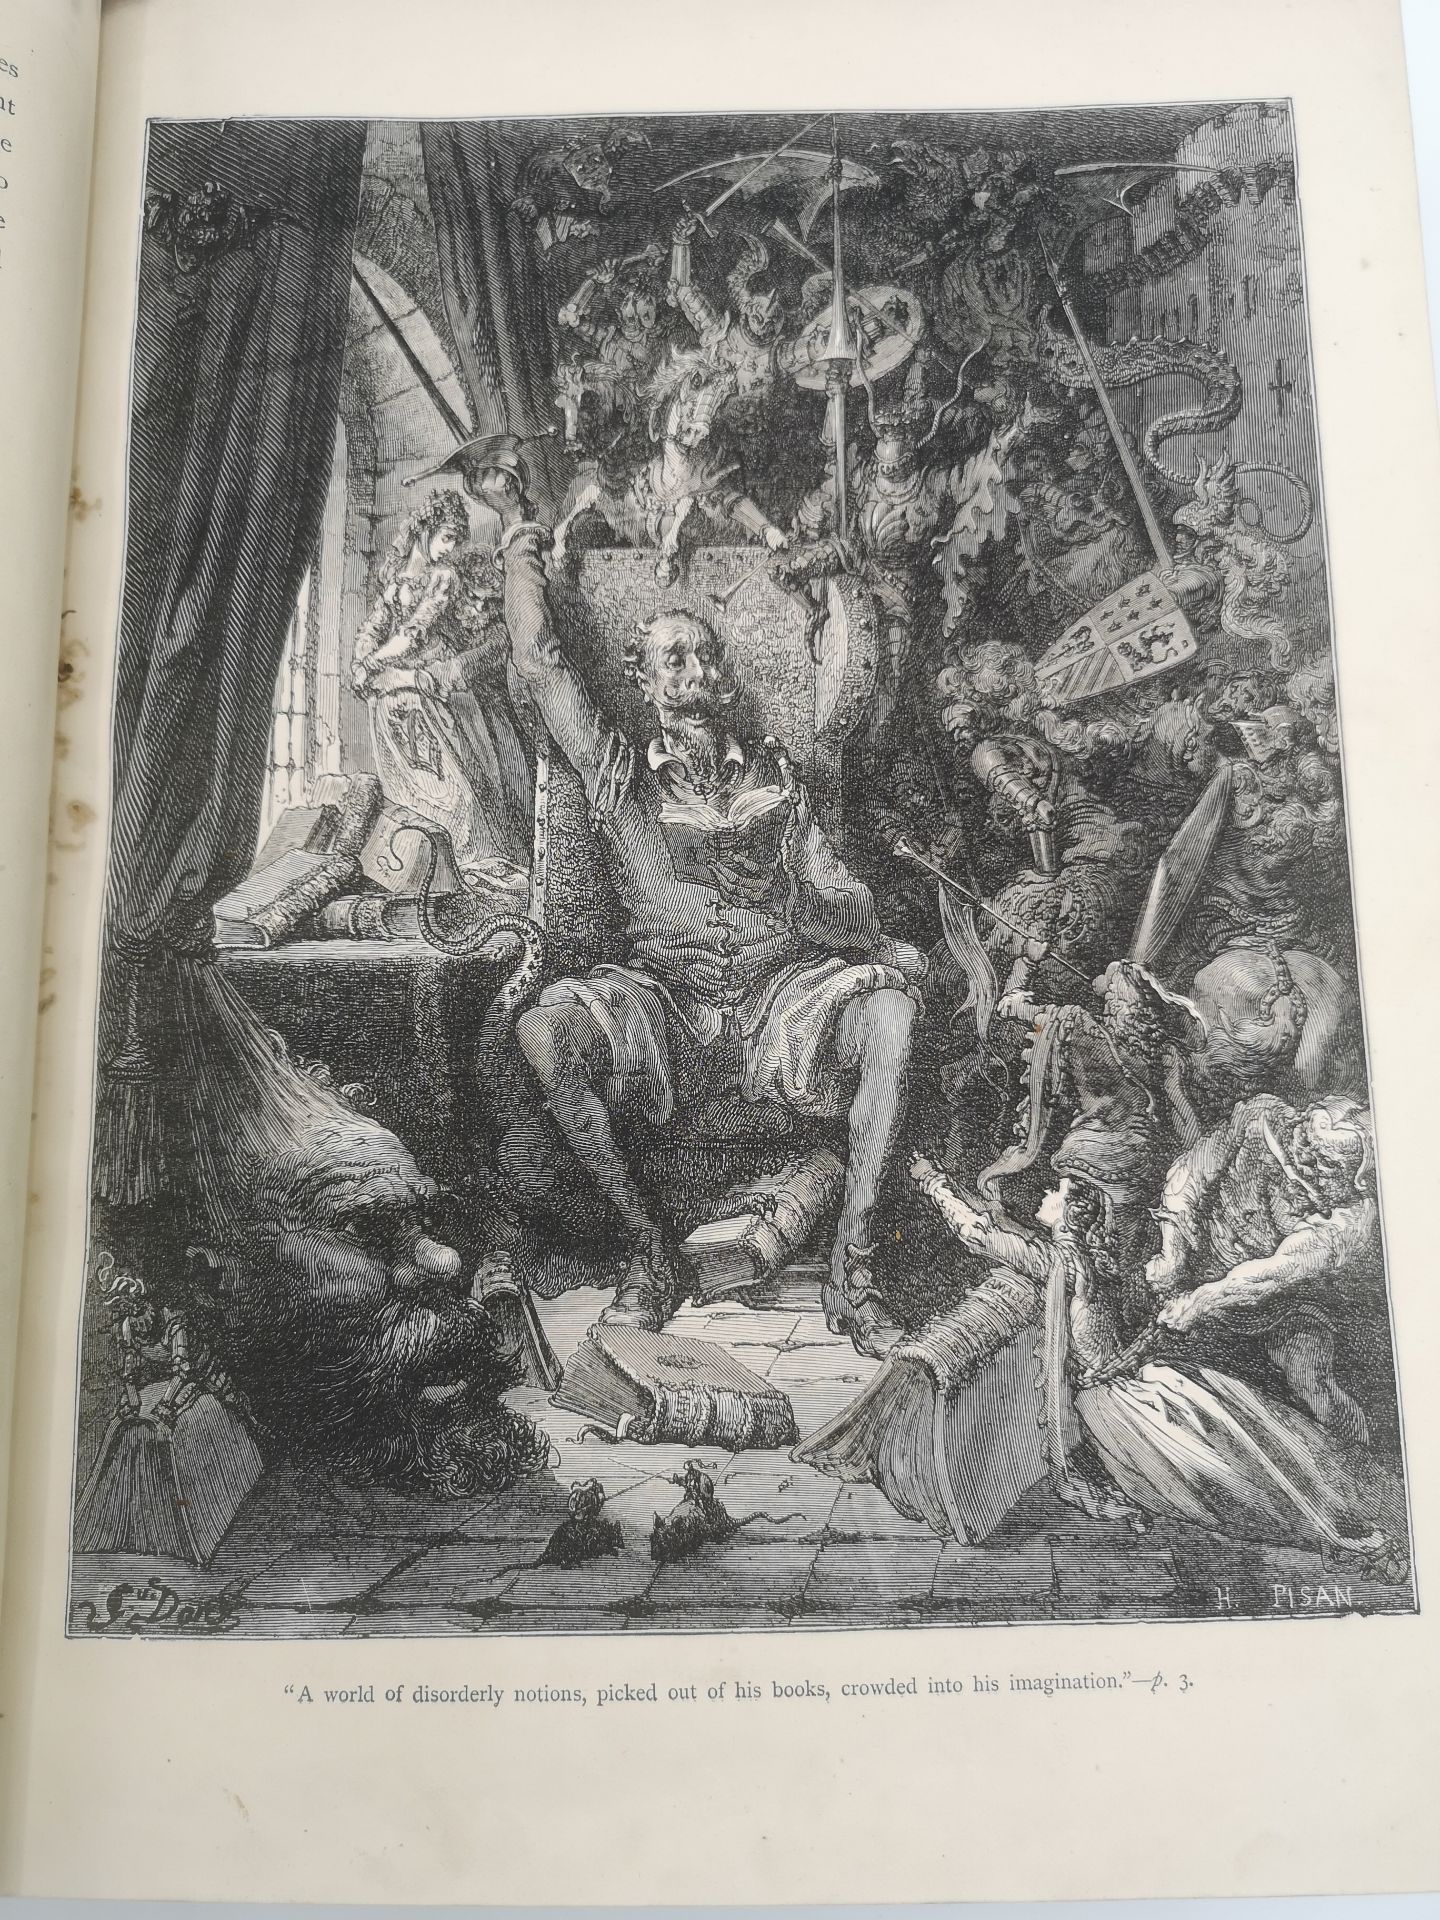 The History of Don Quixote by Cervantes, illustrated by Gustave Dore - Image 3 of 3